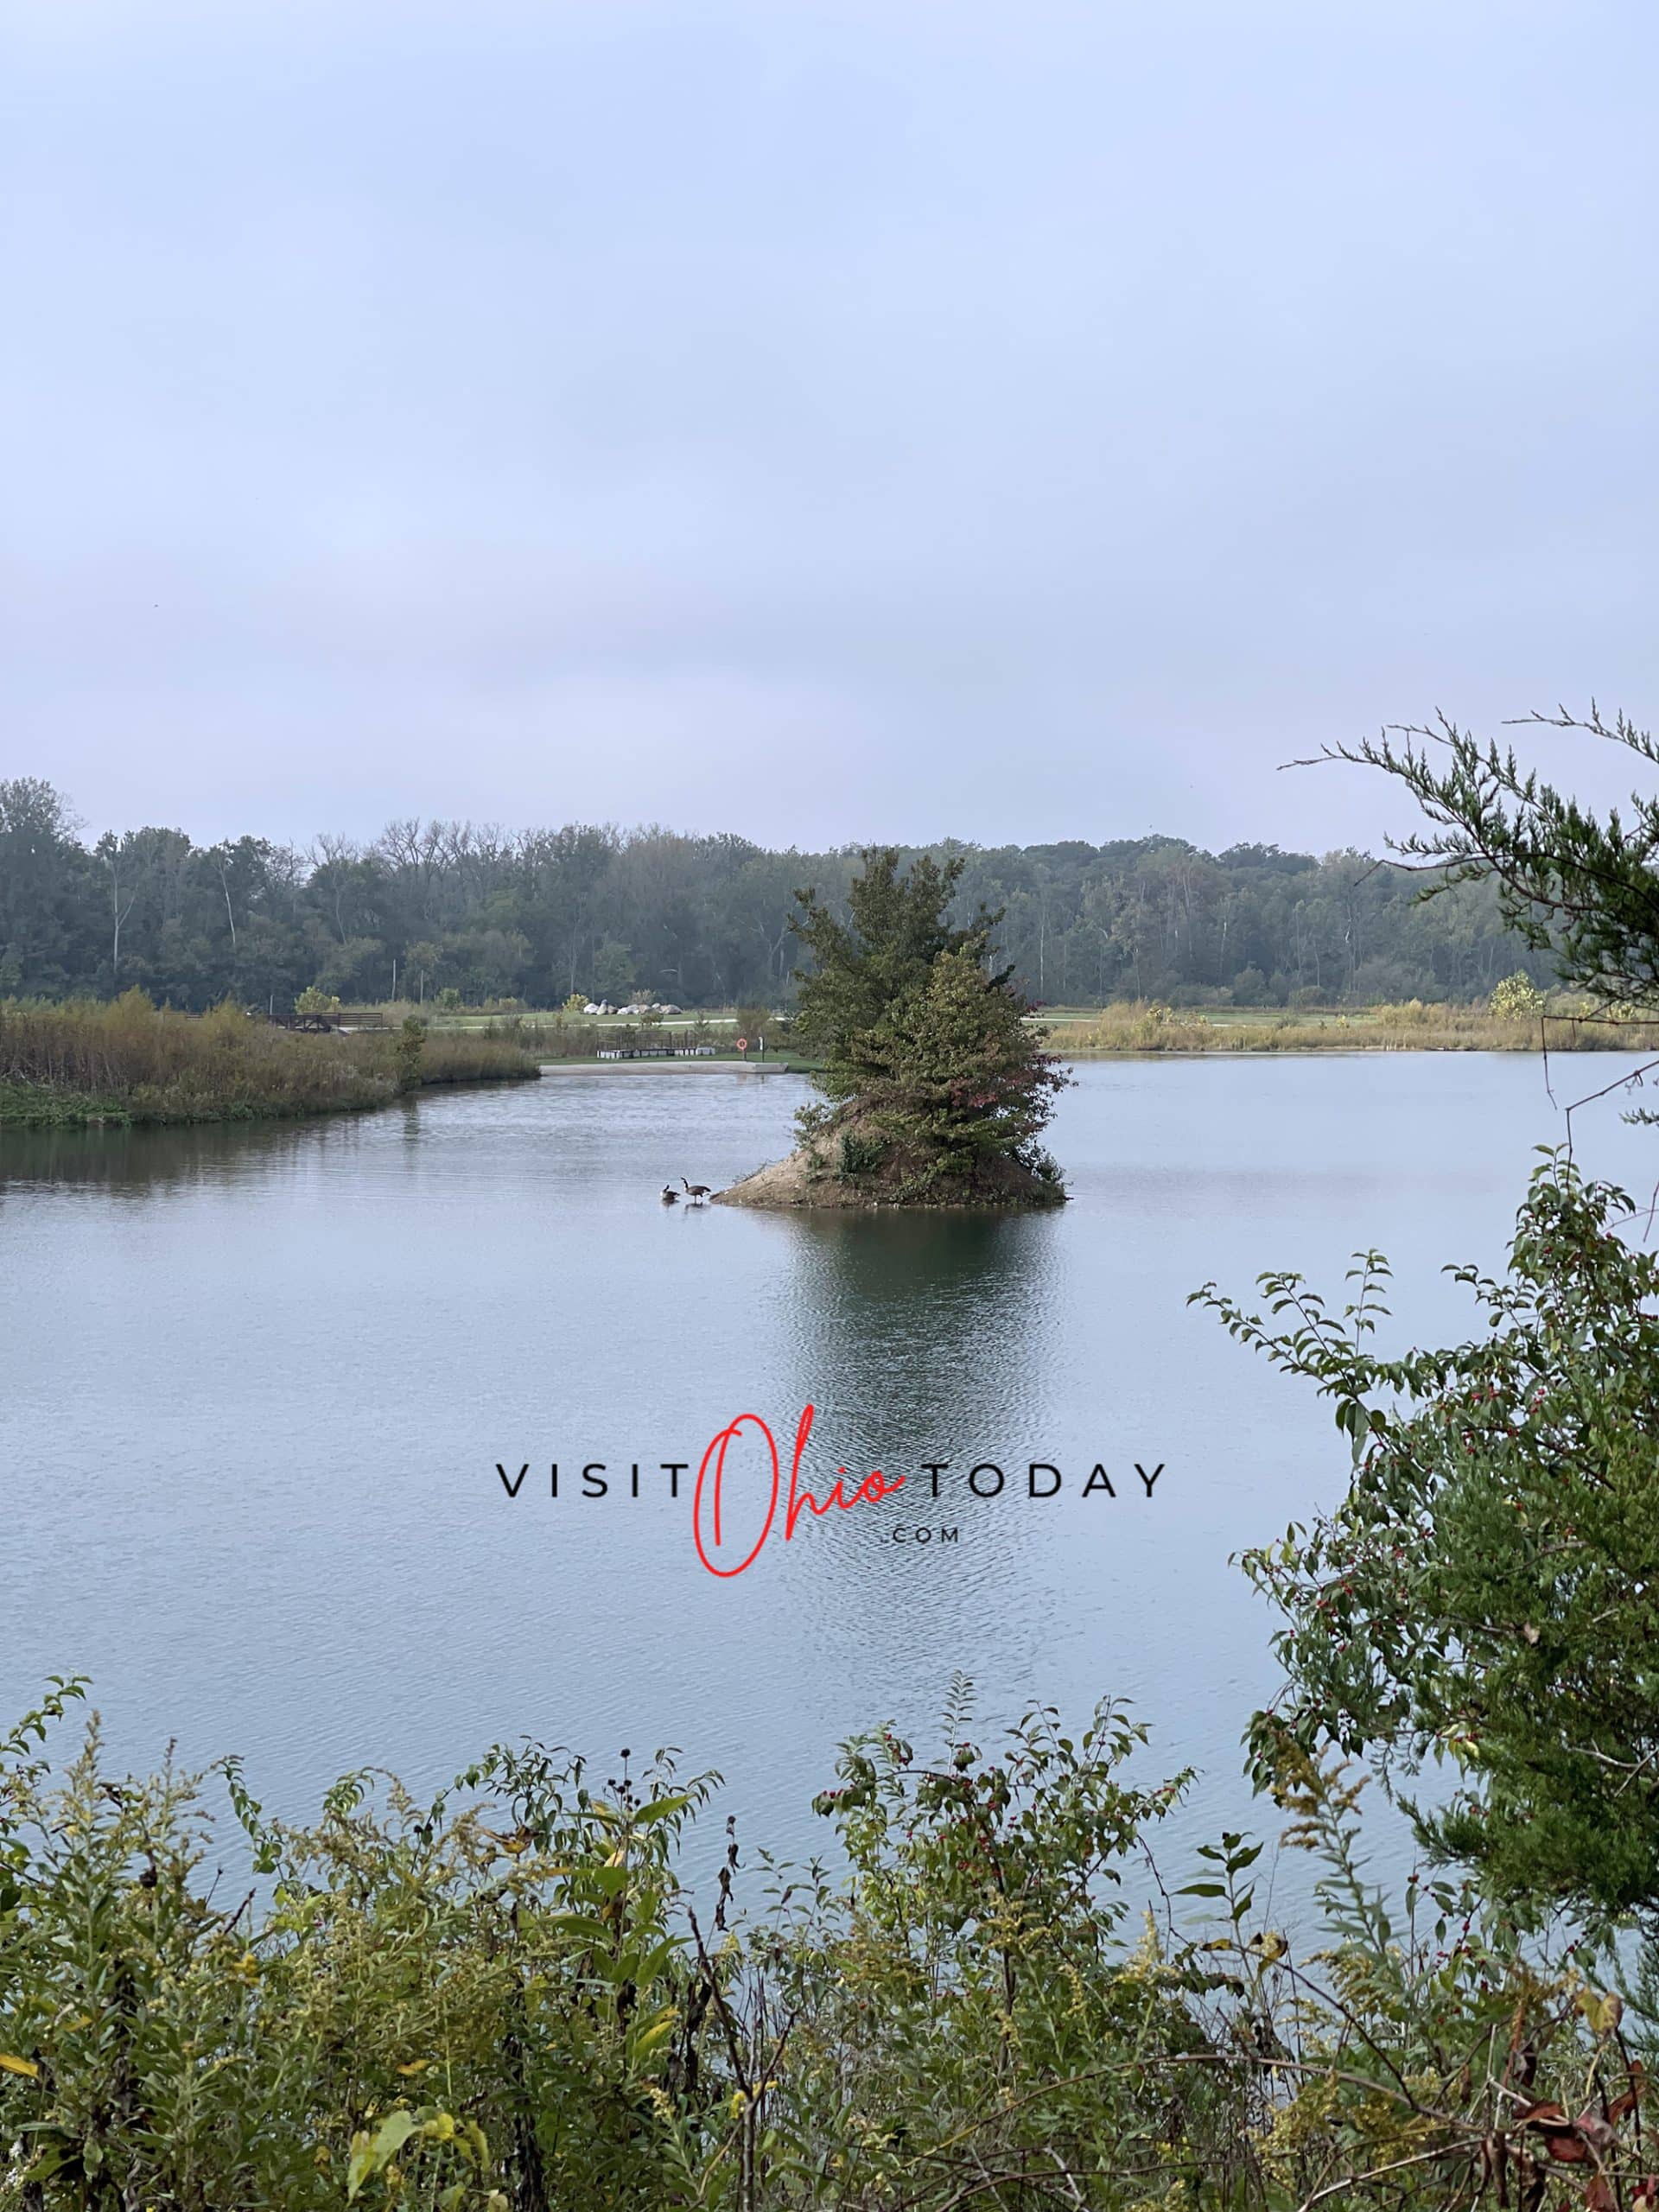 vertical photo showing a lake at prairie oaks metro park with a small island with foliage on it, and foliage in the foreground Photo credit: Cindy Gordon of VisitOhioToday.com